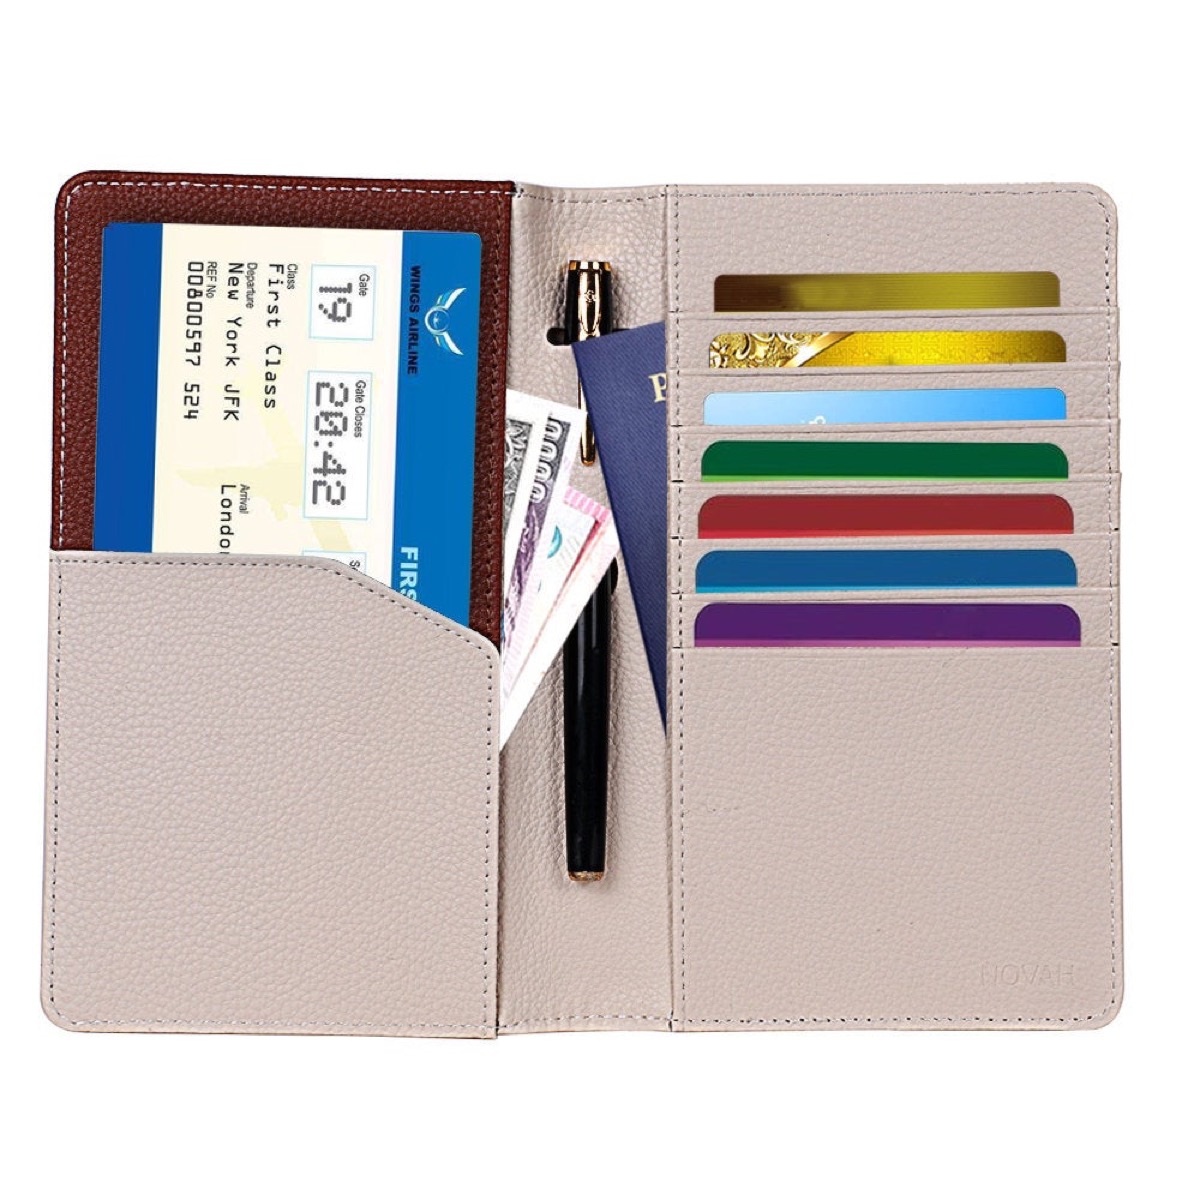 All-in-One Passport Holder and Wallet Travel Accessories